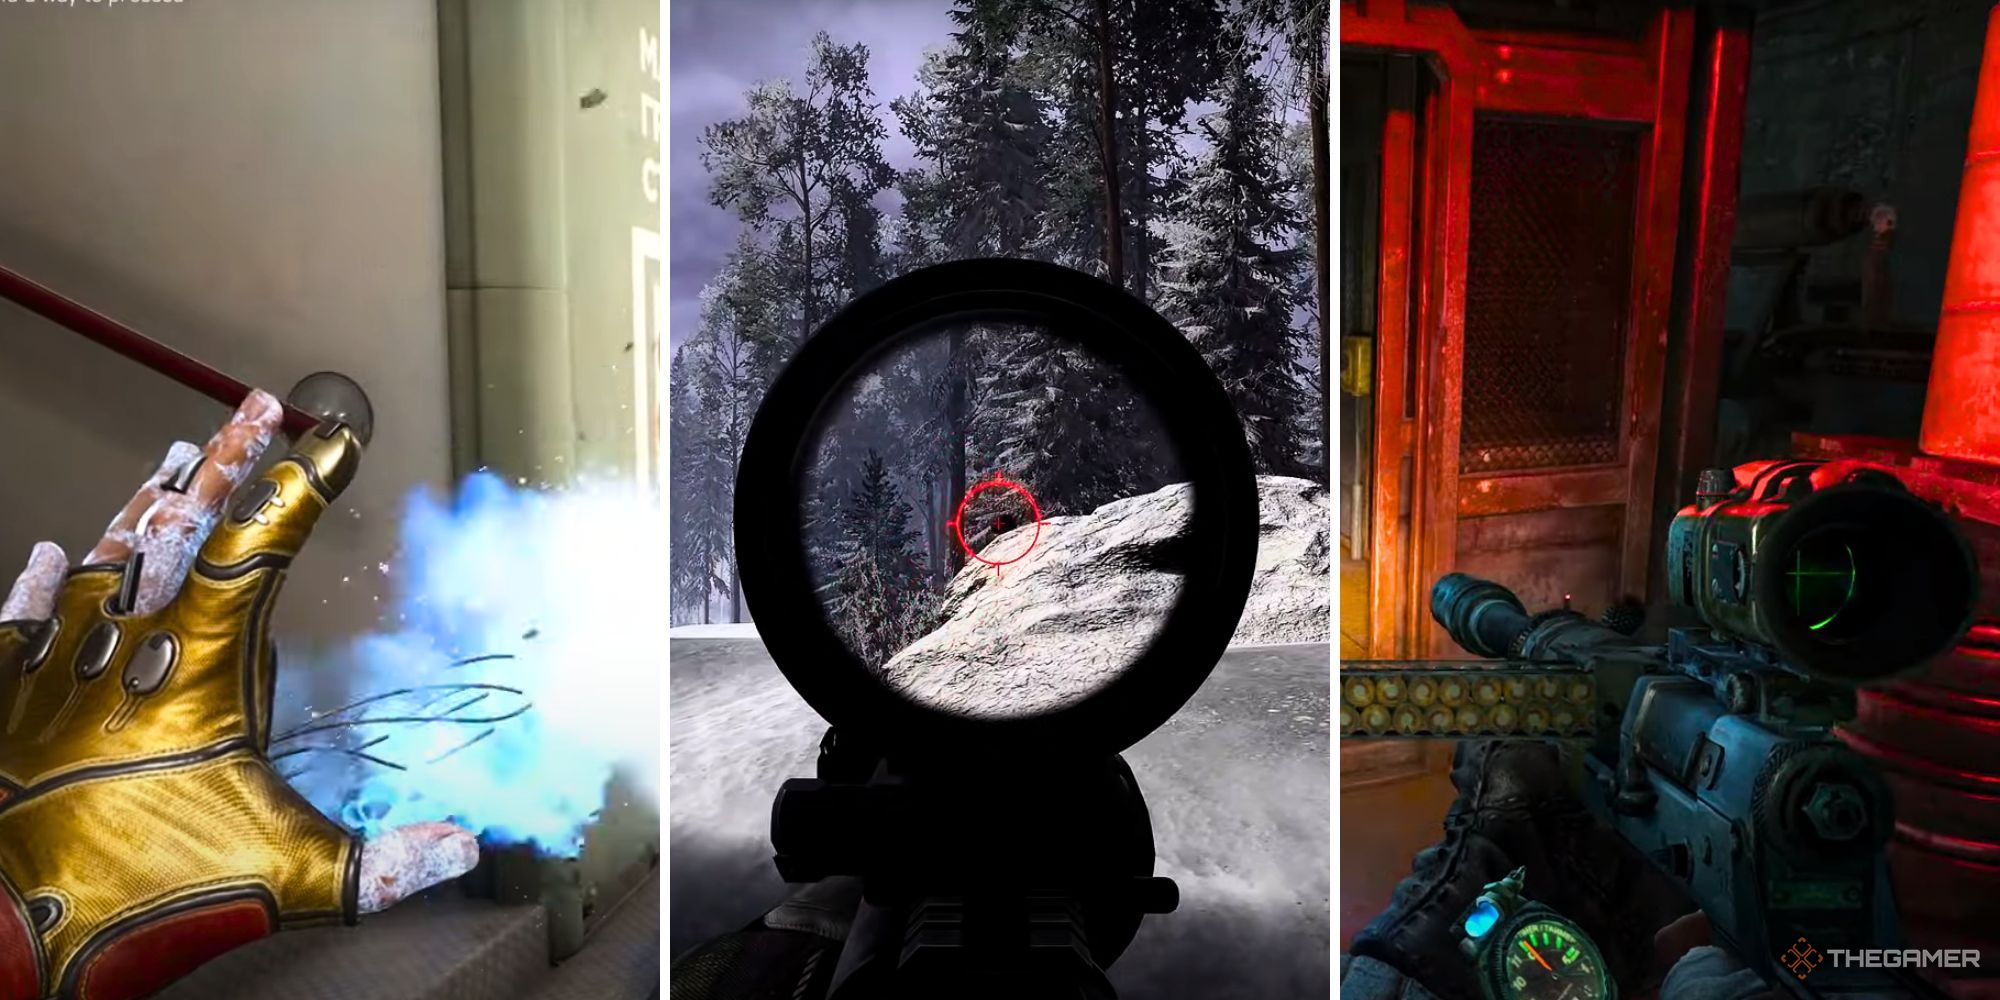 A split image of a gold-gloved hand spraying a cold mist, a weapon scope with a red crosshair in a snowy forest, and a post-apocalyptic looking SMG in a room lit by red light.